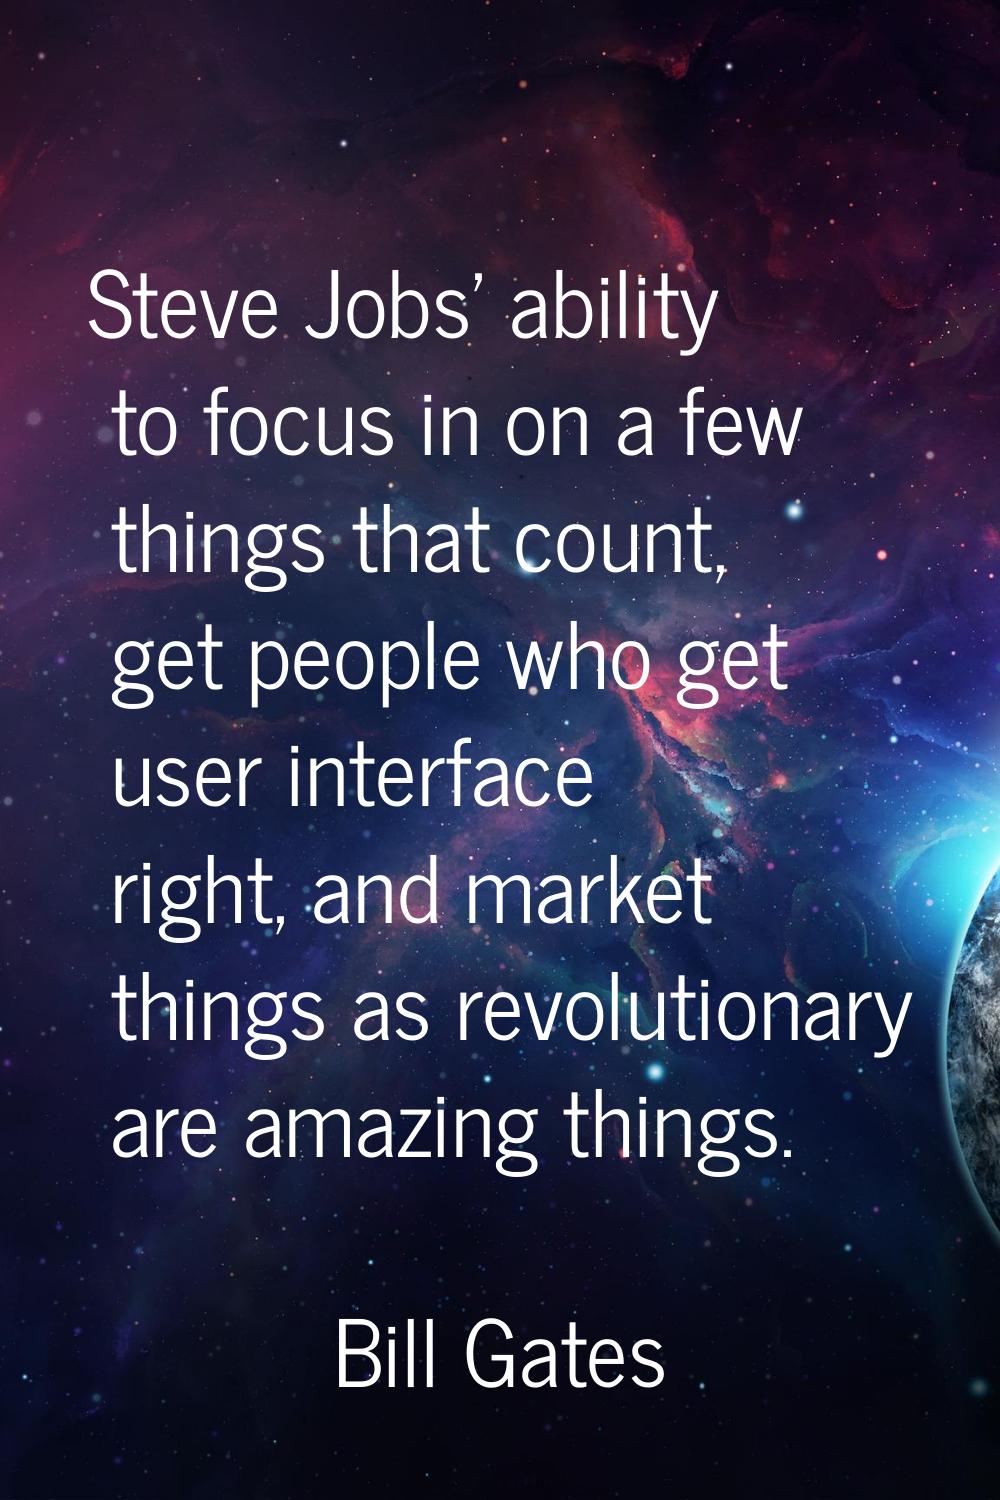 Steve Jobs' ability to focus in on a few things that count, get people who get user interface right